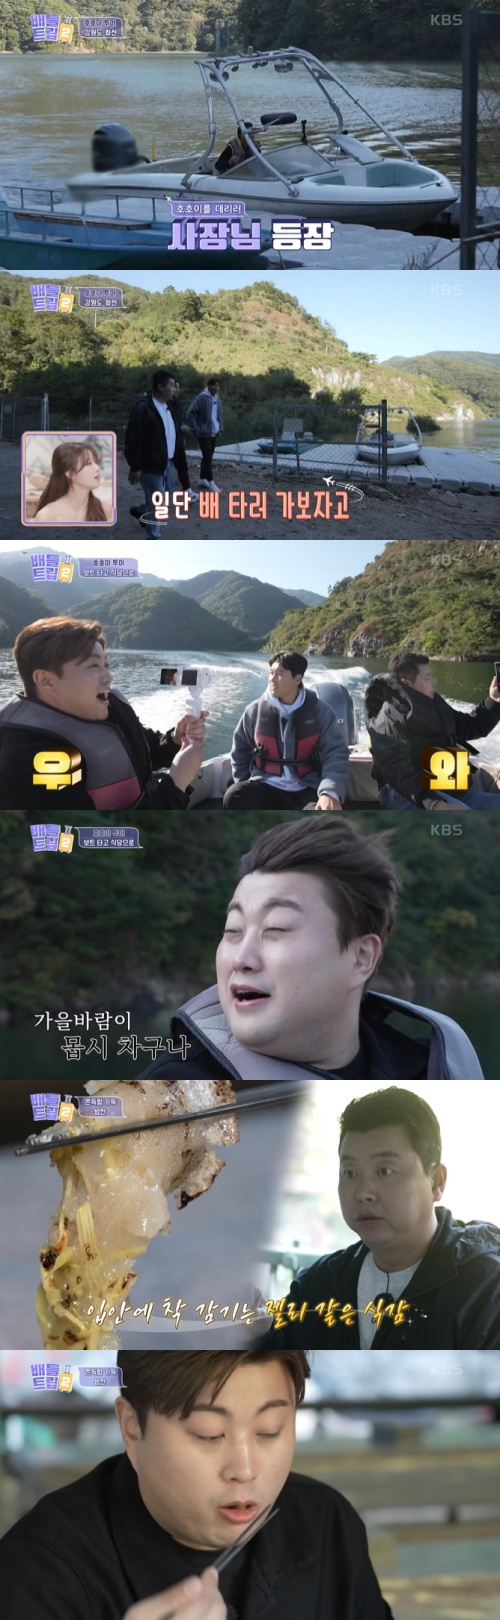 On the 19th broadcast KBS 2TV Battle Trip 2, Jeong Ho-young, Lee Dong-gook, Kim Ho-joongs Gangwon Province and South Korea Hwacheon Travel got on the air.The team of Jeong Ho-young, Kim Ho-joong and Lee Dong-gook, who took the theme of healing on this day, left Travel to Gwangwon Province, South Korea Hwacheon.First, Kim Ho-joong, who was driving with Jeong Ho-young, said, How long have we been going on a trip? Its been a long time since the Hoho Brothers have united. Yoon Doo-joon said, The combination of the three is fresh.Lee Dong-gook and newcomer Jeong Ho-young expressed their excitement, saying, I personally like soccer players. I couldnt sleep because I was excited yesterday.Jeong Ho-young arrived at the promised place and greeted Lee Dong-gook awkwardly.Jeong Ho-young greeted shyly saying I like it and Lee Dong-gook was embarrassed that it was very awkward and okay.Kim Ho-joong, who arranged the meeting between the two, was happy as the youngest, and Lee Dong-gook, who was in the car, laughed at the conversation with Jeong Ho-young after seeing the back of his head.The three people who came to the restaurant according to the navigation contacted the president of the restaurant. Then the motorboat appeared in the river. The three people who were surprised by the island in the land came out with an exclamation of the picturesque scenery as soon as they set off on the motorboat.The three traveled to the village by boat along the upper Paro Lake. As the boat speeded up, Kim Ho-joong said, This is the first time I have eaten rice so spectacularly.It is good to come to Hyodo sightseeing with my brothers. He laughed with a distorted face in the wind.Then the three of them arrived at the village of Bisugumi, where four families lived, and the three men who went to the Restaurant ordered wild vegetables and chestnuts.Lee Dong-gook, who ate wild bibimbap, said, I ate a lot of bibimbap in Jeonju and it seems to be the best. There are many kinds of herbs and fresh.I feel healthy, Kim Ho-joong, who ate a mouthful of bibimbap, admired, The aroma of adrenaline spreads. Then the night came, and Jeong Ho-young, who tasted it, said, Why is it so cold? It looks like jelly.I have never felt such a texture before. The three then joined Makgeolli in a tavern full of more than 100 traditional liquors, and later shared a glass of wine with chef Jeong Ho-young at the hostel.Jeong Ho-young said, All three people are busy in Seoul, but its so convenient to come here. I want to travel longer later, and Lee Dong-gook agreed, saying, I think we really need some time like this.At this time, Kim Ho-joong opened a karaoke machine called Thank you, and Jeong Ho-young finished the friendship travel of three men with tears.